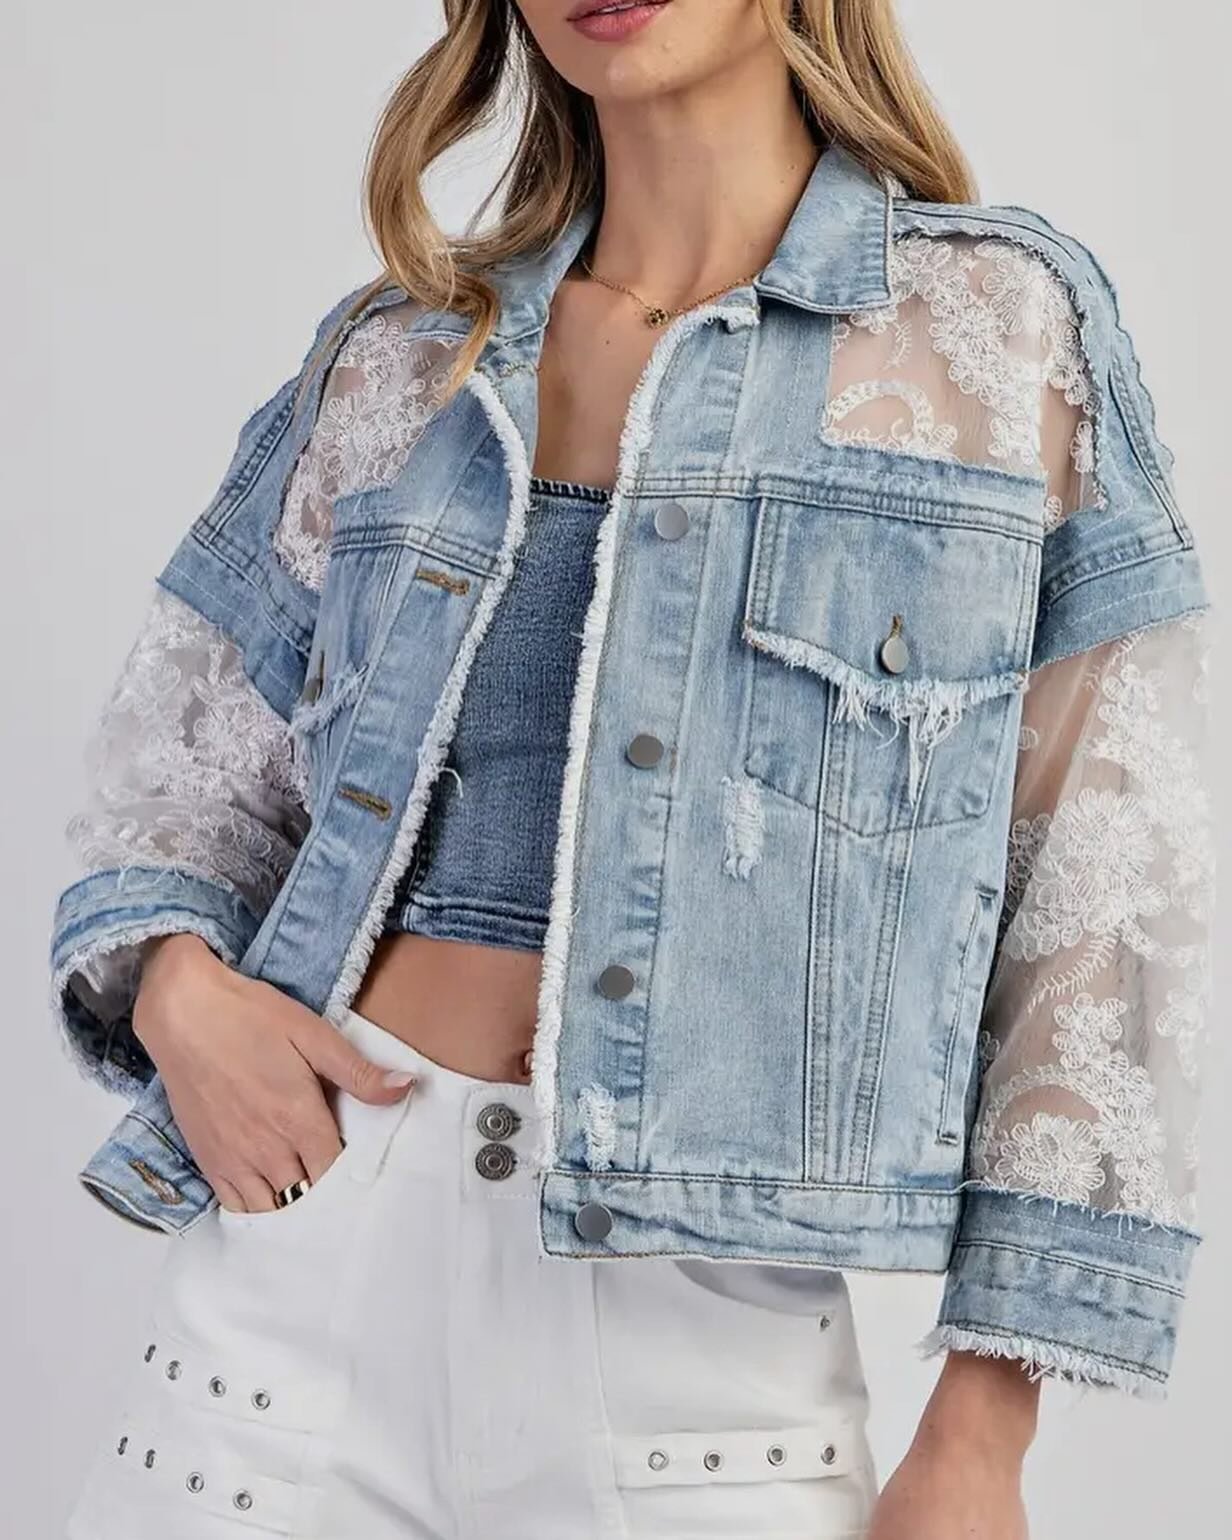 ✨Just arrived!✨ This adorable denim and lace jacket is available in sizes Small to Large. Available in our Sylva location only. 💕